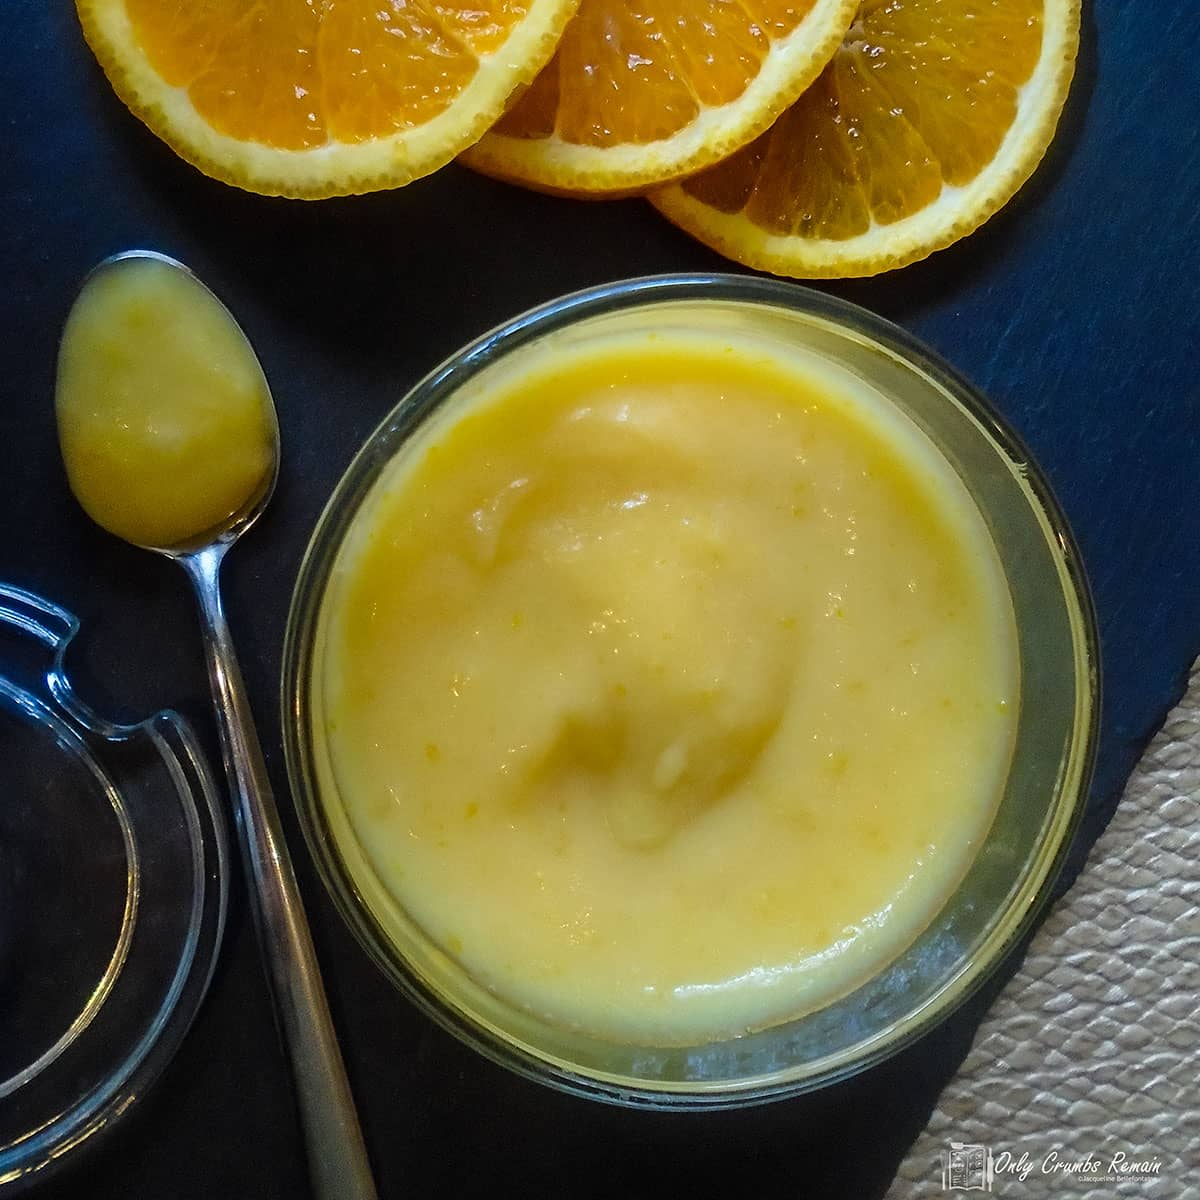 jar of homemade orange curd with a spoon by the side.